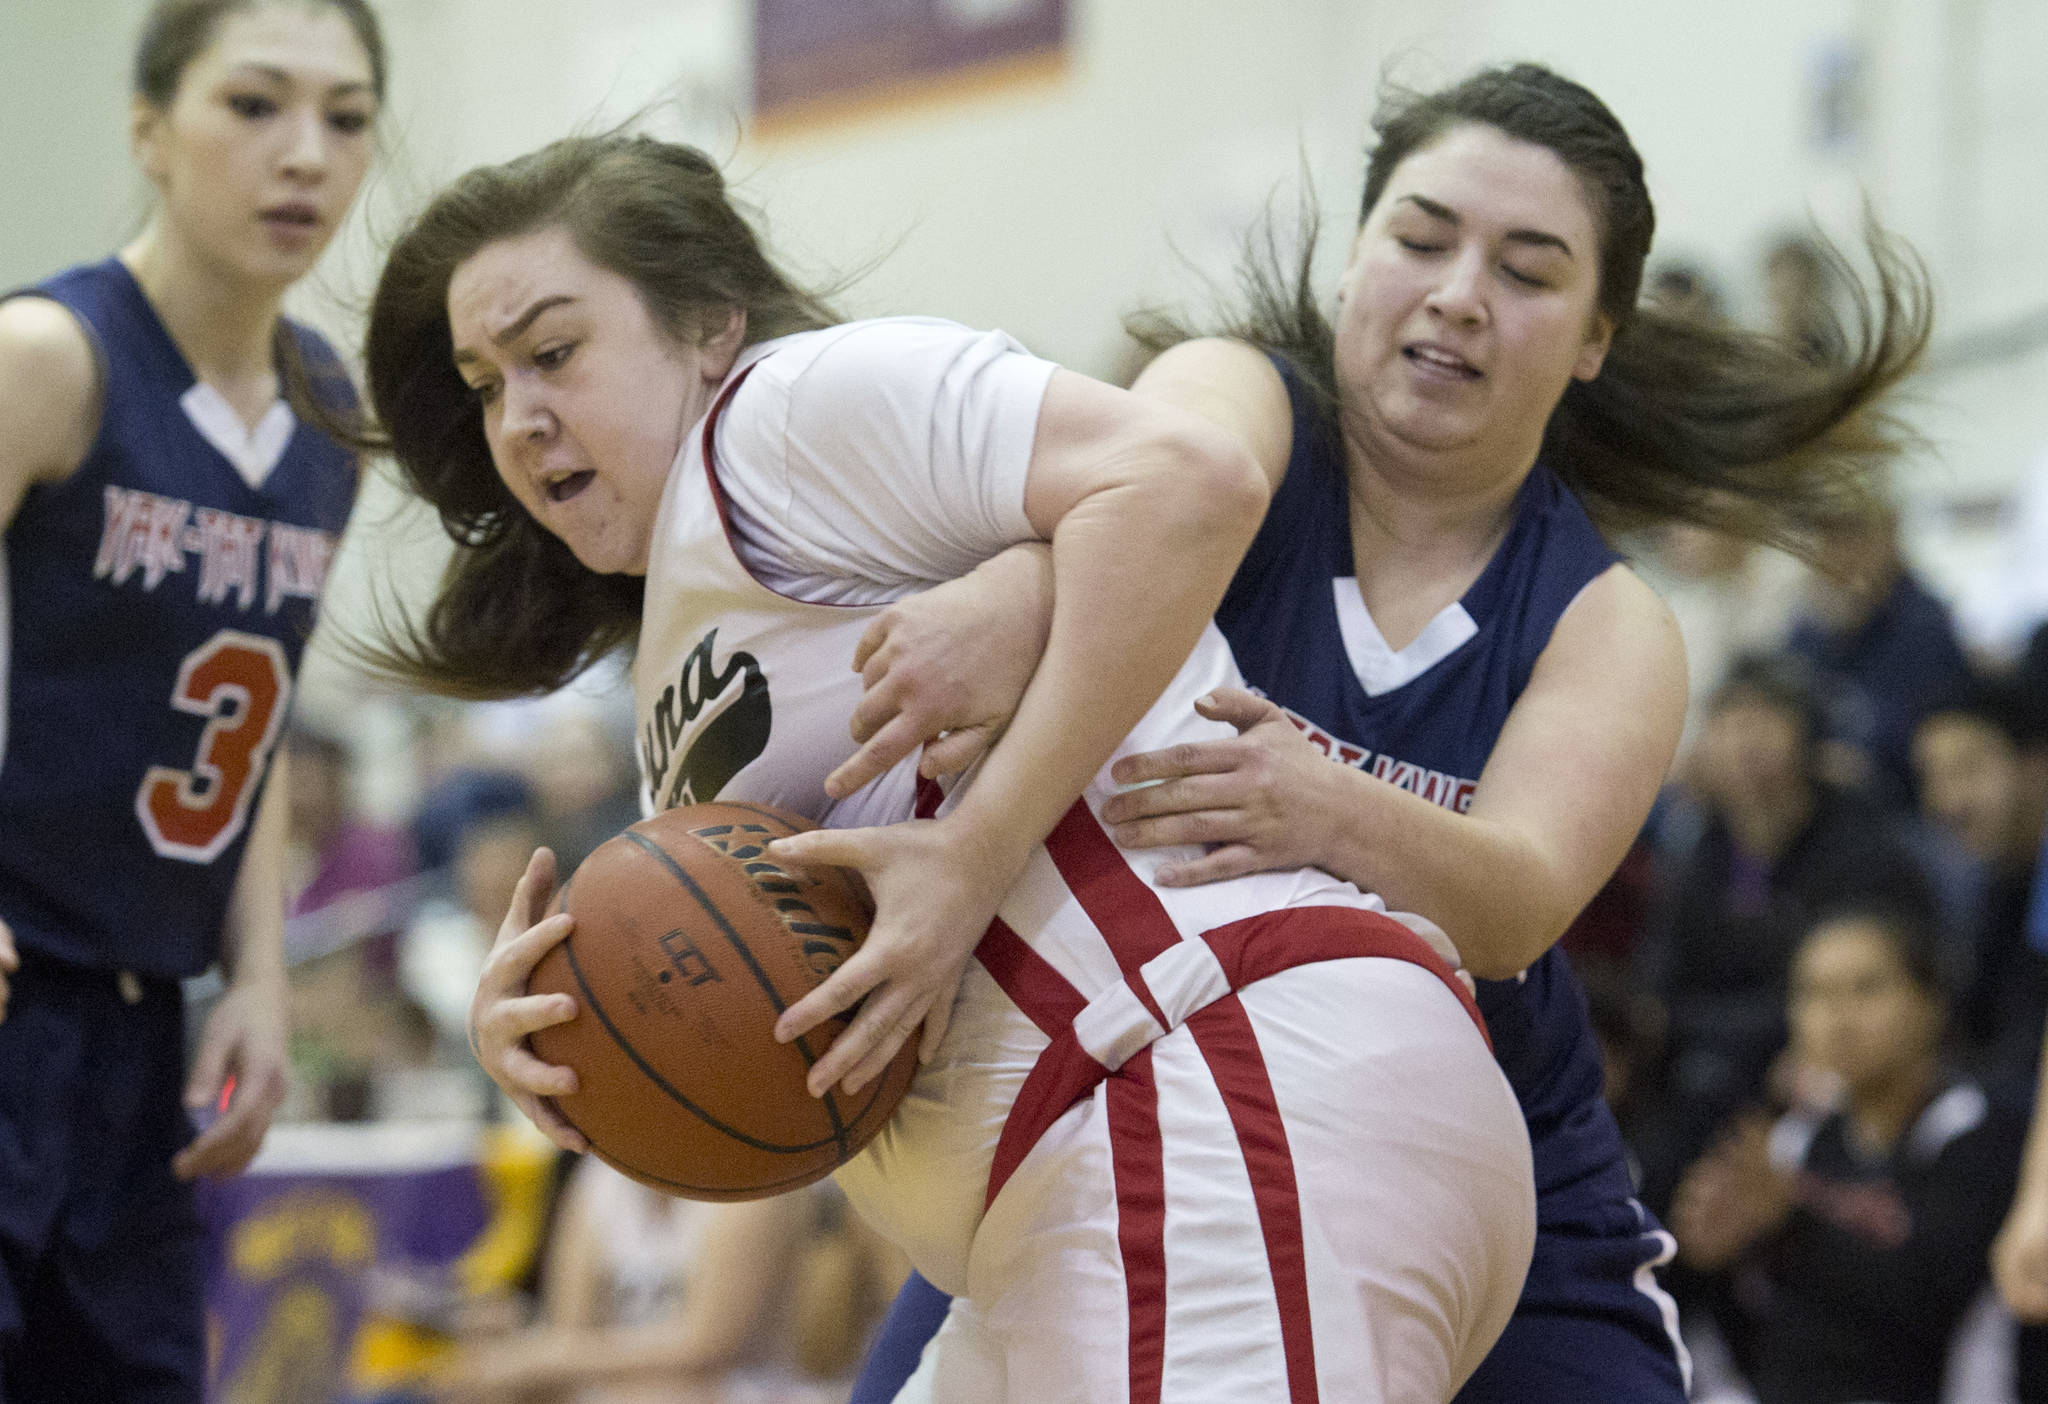 Yakutat’s Nadine Fraker attempts to steal the ball from Hoonah’s Mariah Martin in their Womens Bracket game in the Lions Club’s Gold Medal Basketball Tournament at Juneau-Douglas High School on Friday, March 24, 2017. Hoonah won 56-53. (Michael Penn | Juneau Empire)